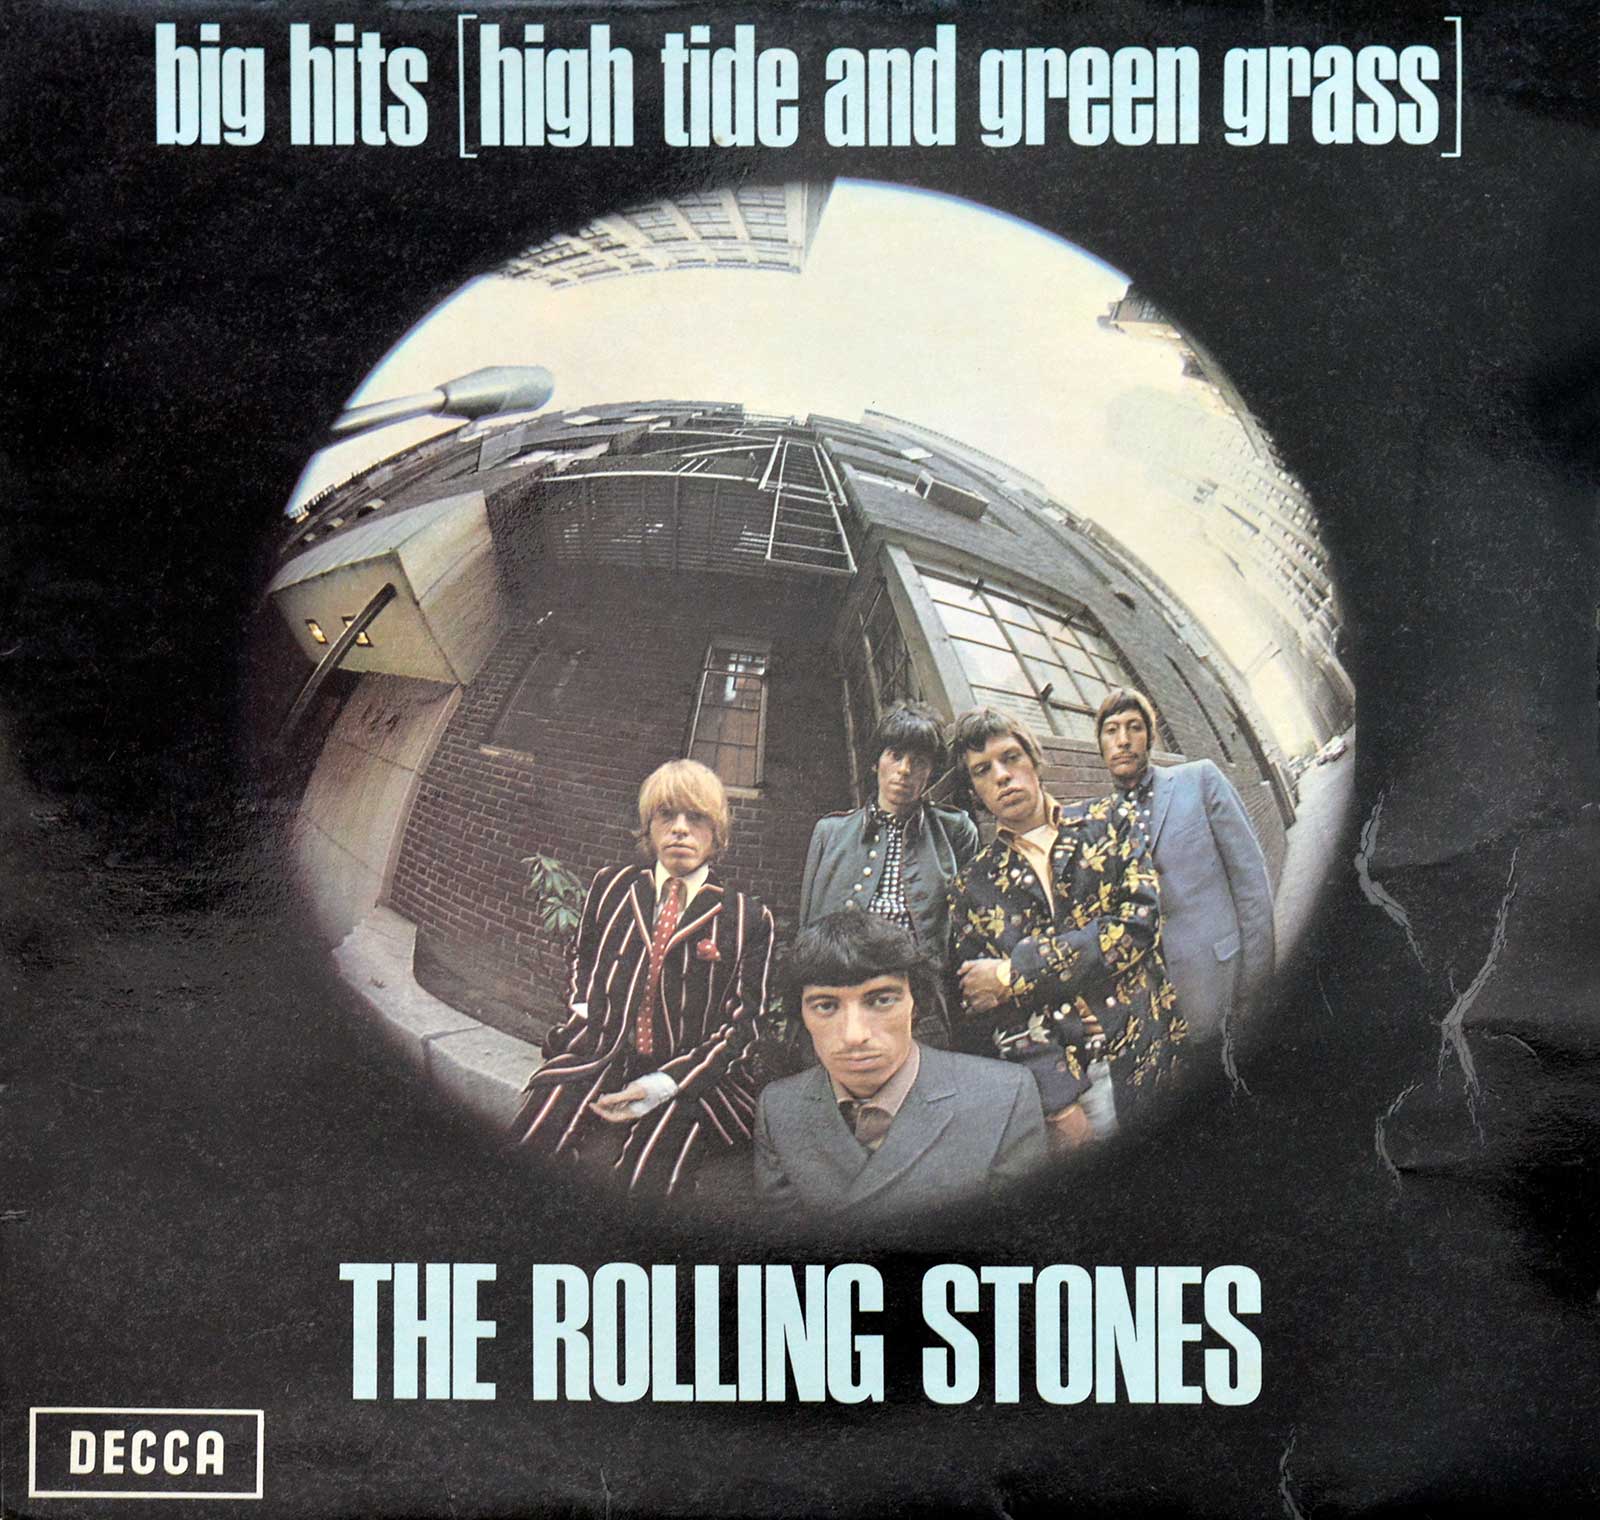 High Resolution Photo ROLLING STONES – Big Hits High Tide And Green Grass Vinyl Record